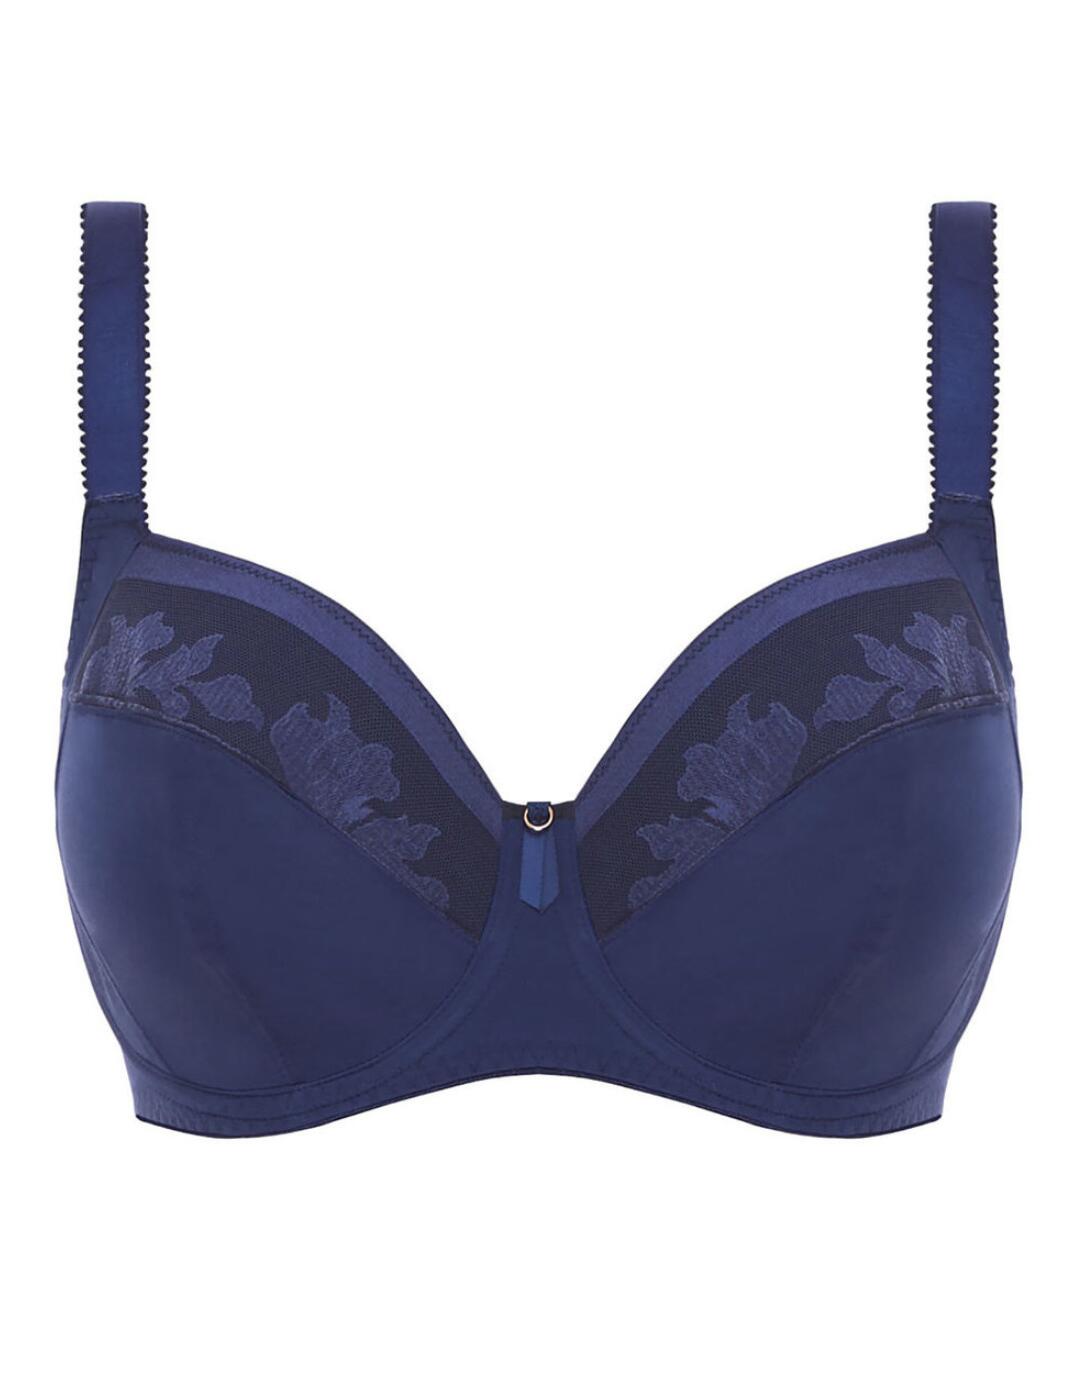 Fantasie Fusion FL3091 W Underwired Full Cup Side Support Bra